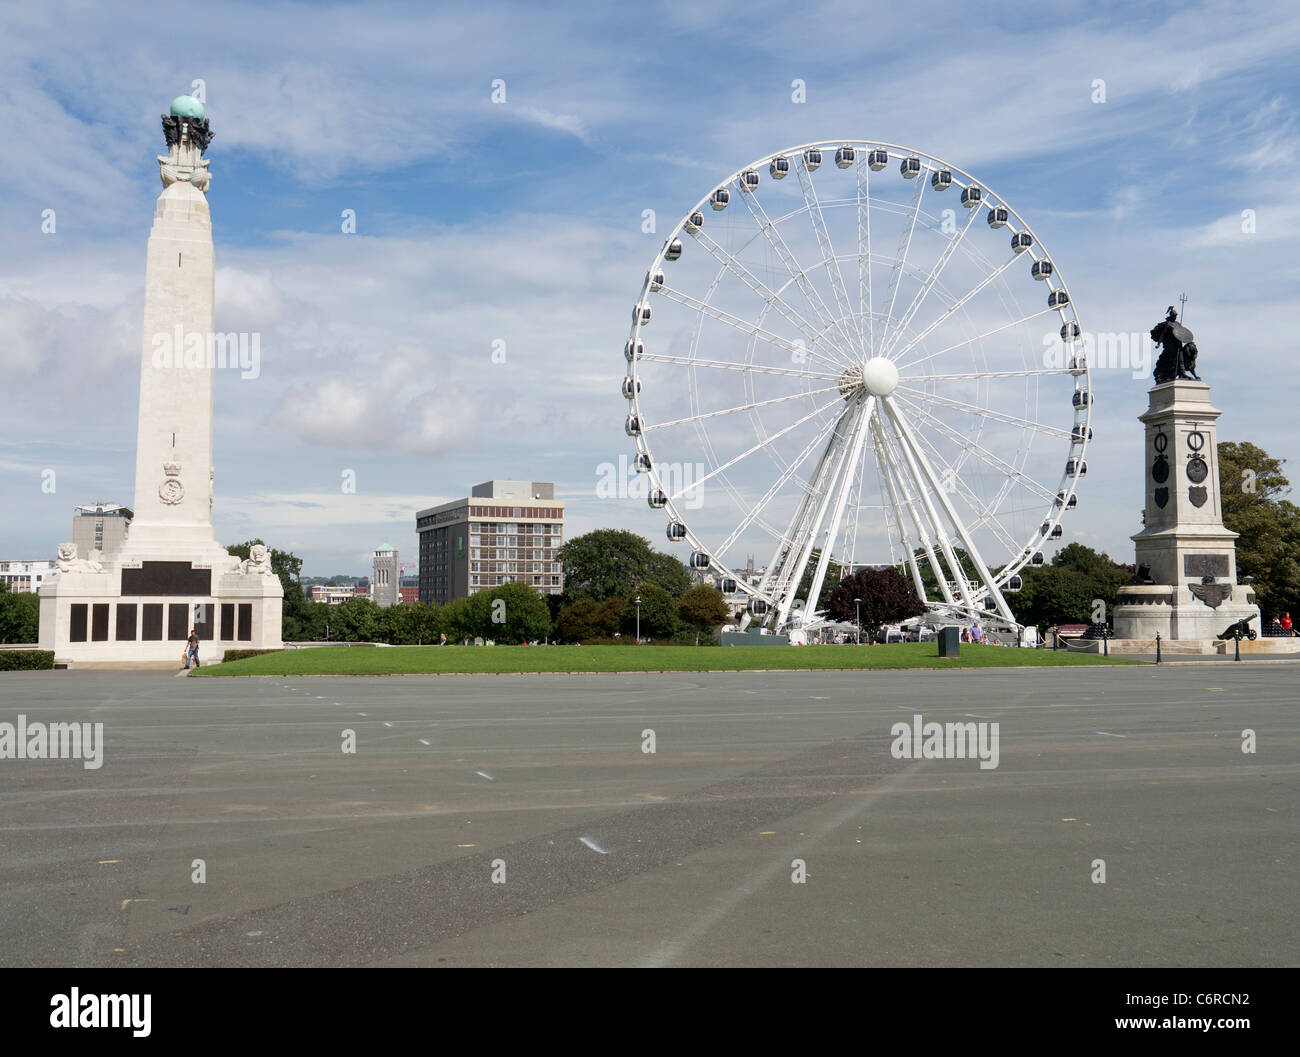 War memorials and the wheel of Plymouth, a 60 meter observation wheel on the Hoe. Stock Photo